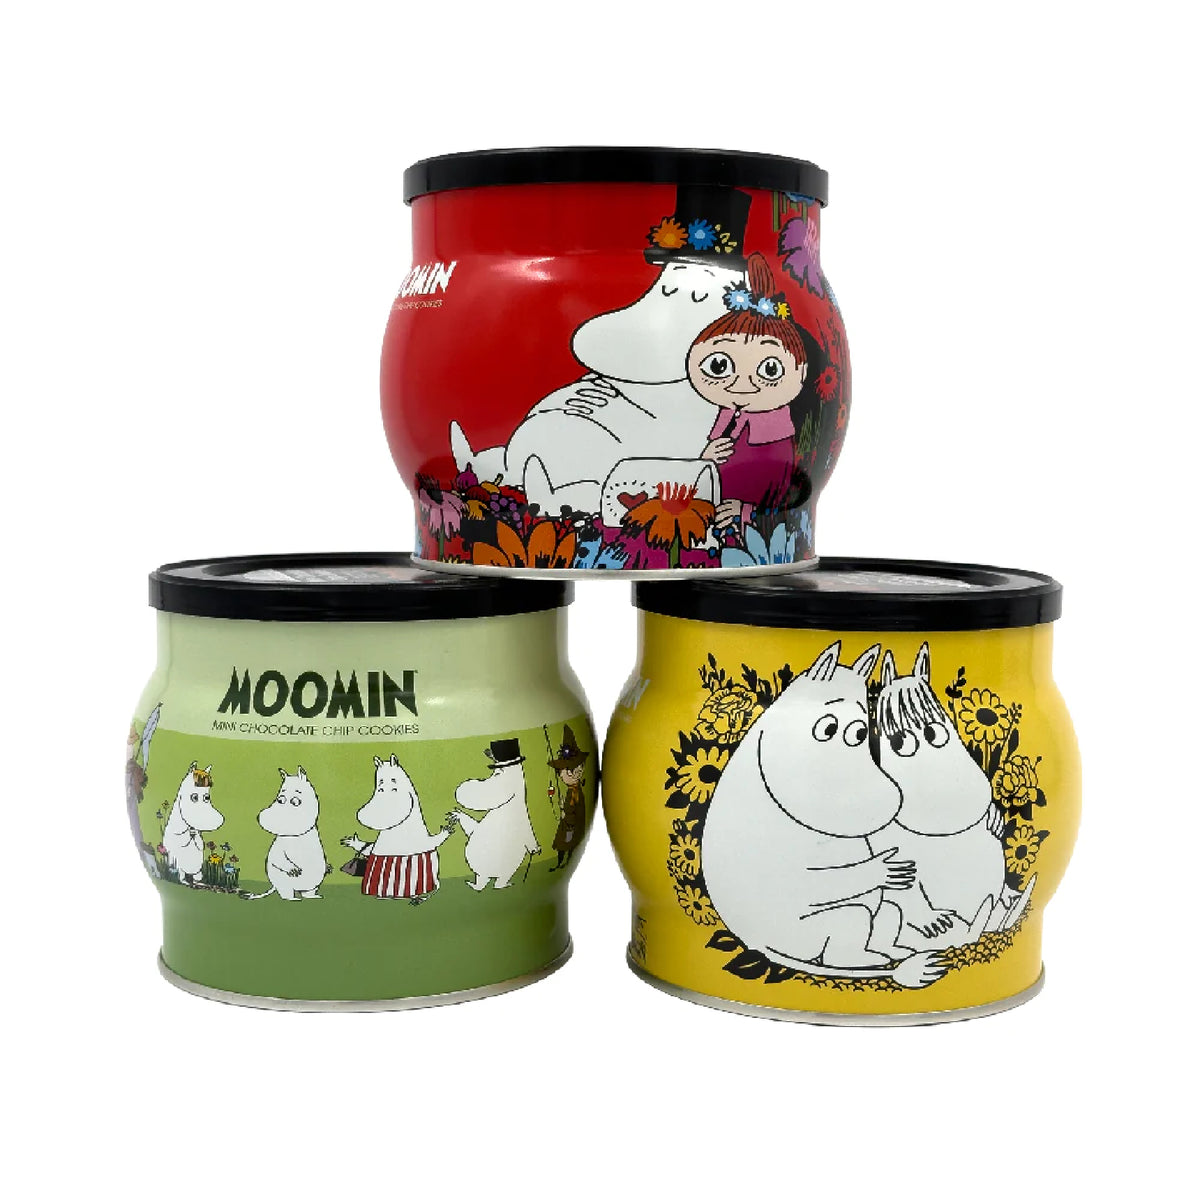 Moomin Chocolate Chip Cookies In A Tin